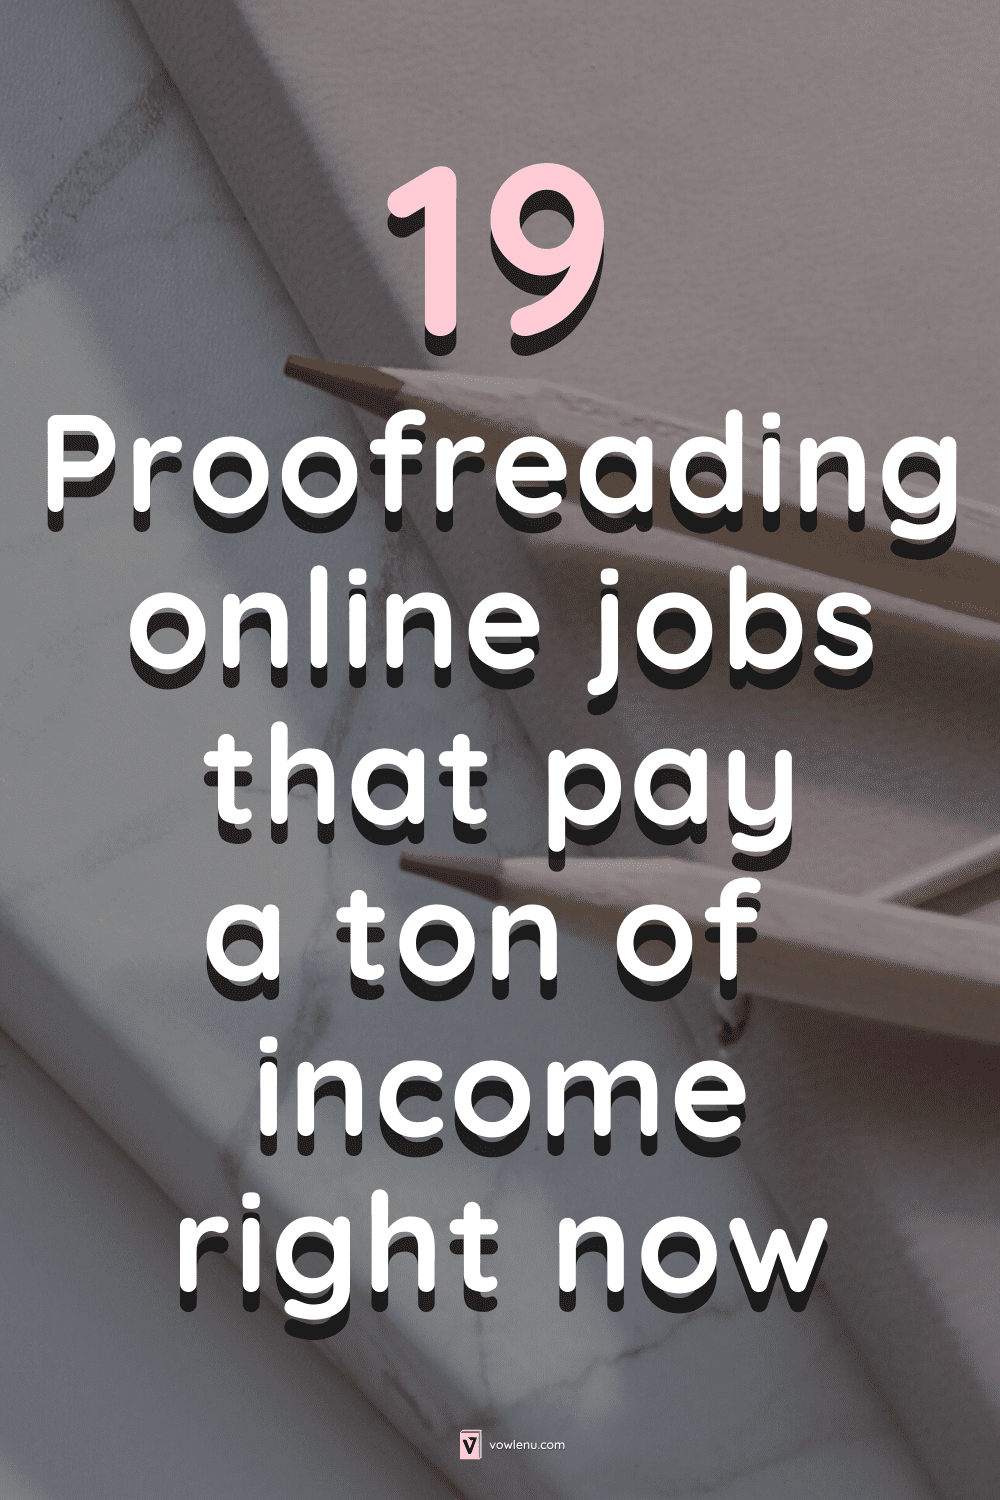 19 Proofreading online jobs that pay a ton of income right now